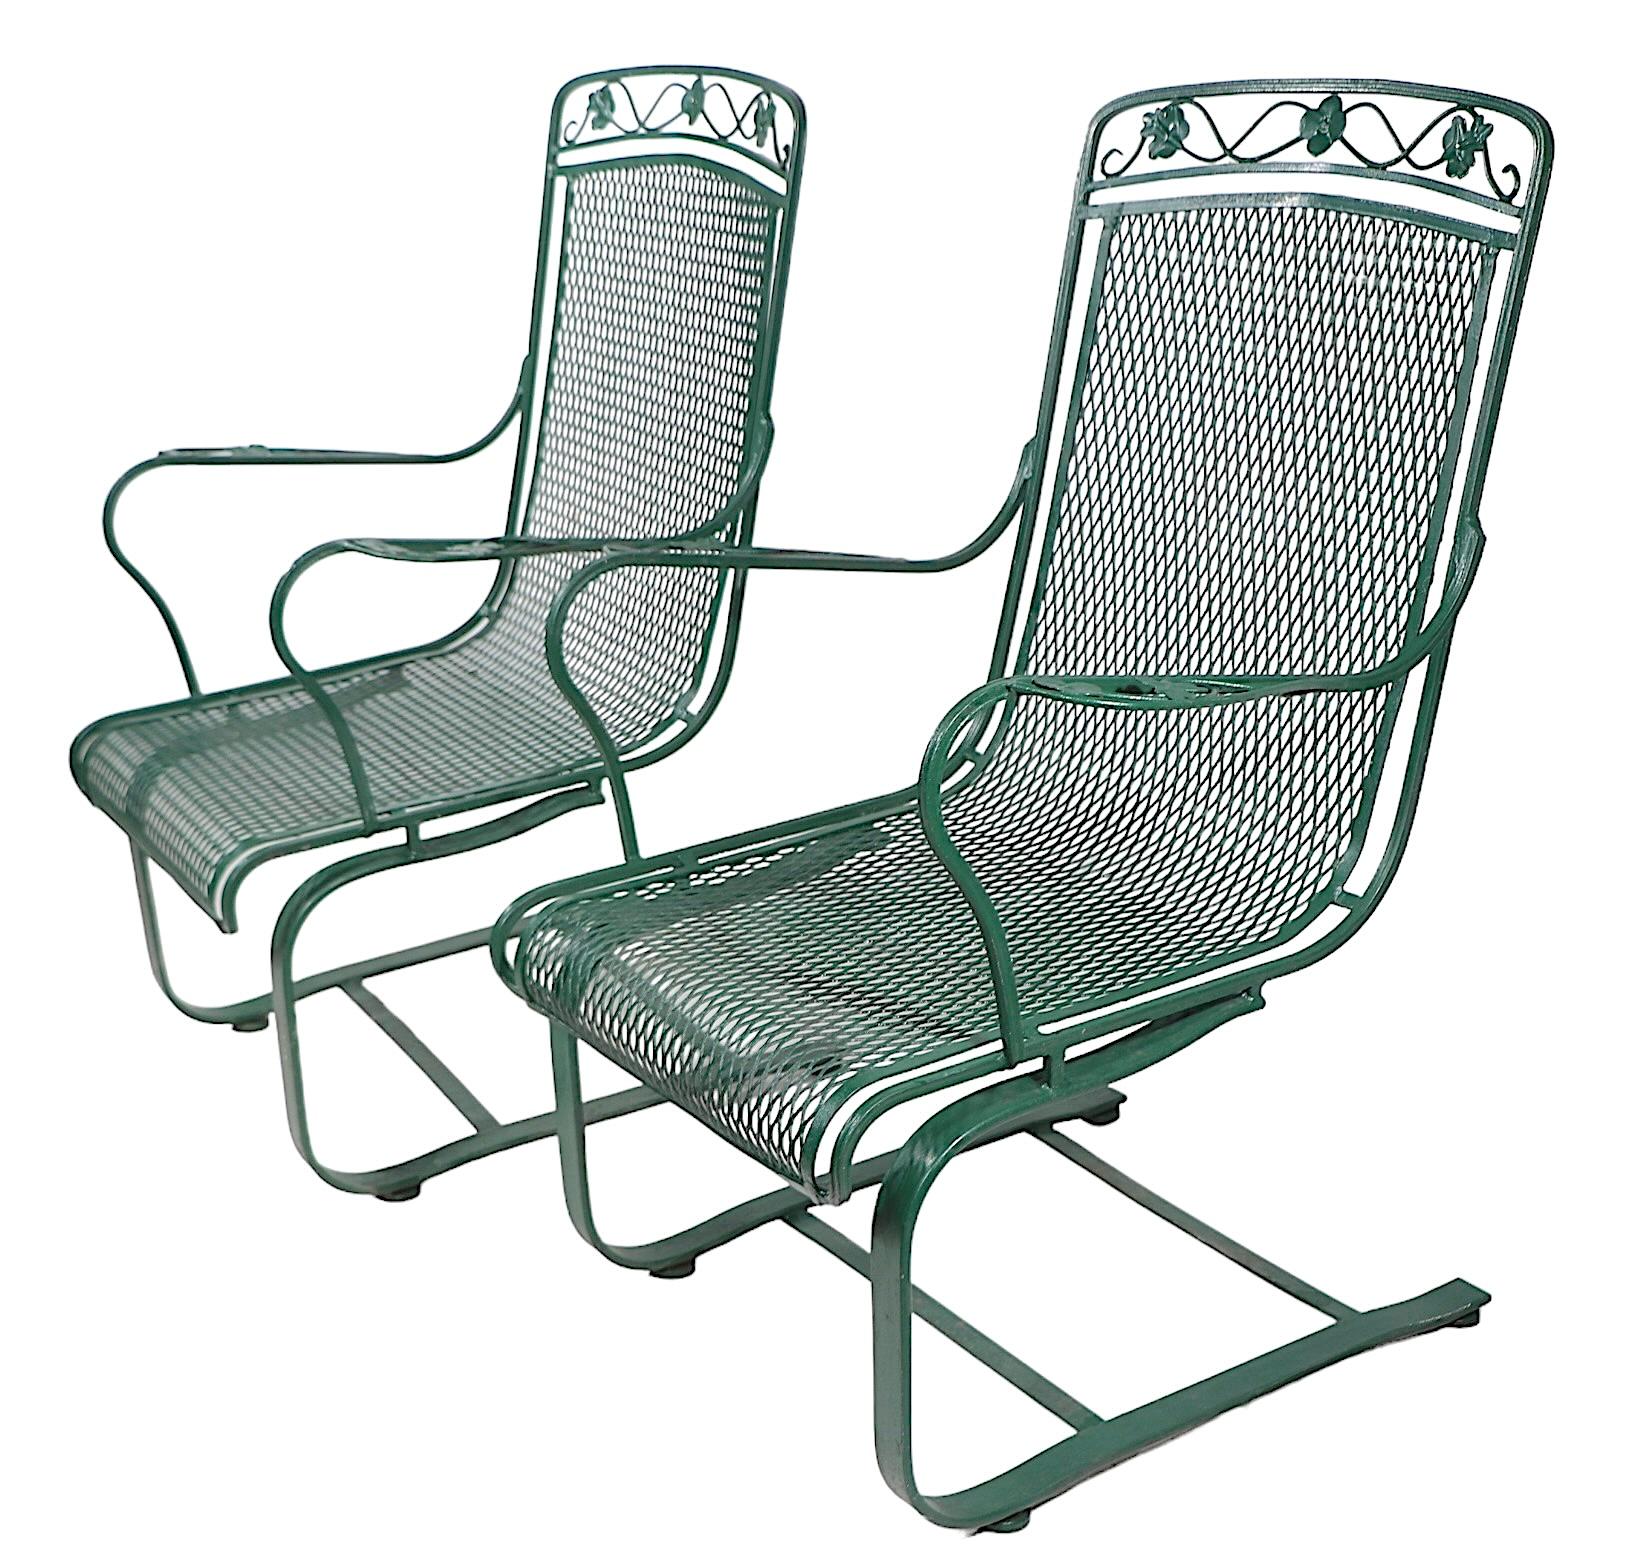 Pr. Cantilevered  Meadowcraft Dogwood Wrought Iron Lounge Chairs  For Sale 2